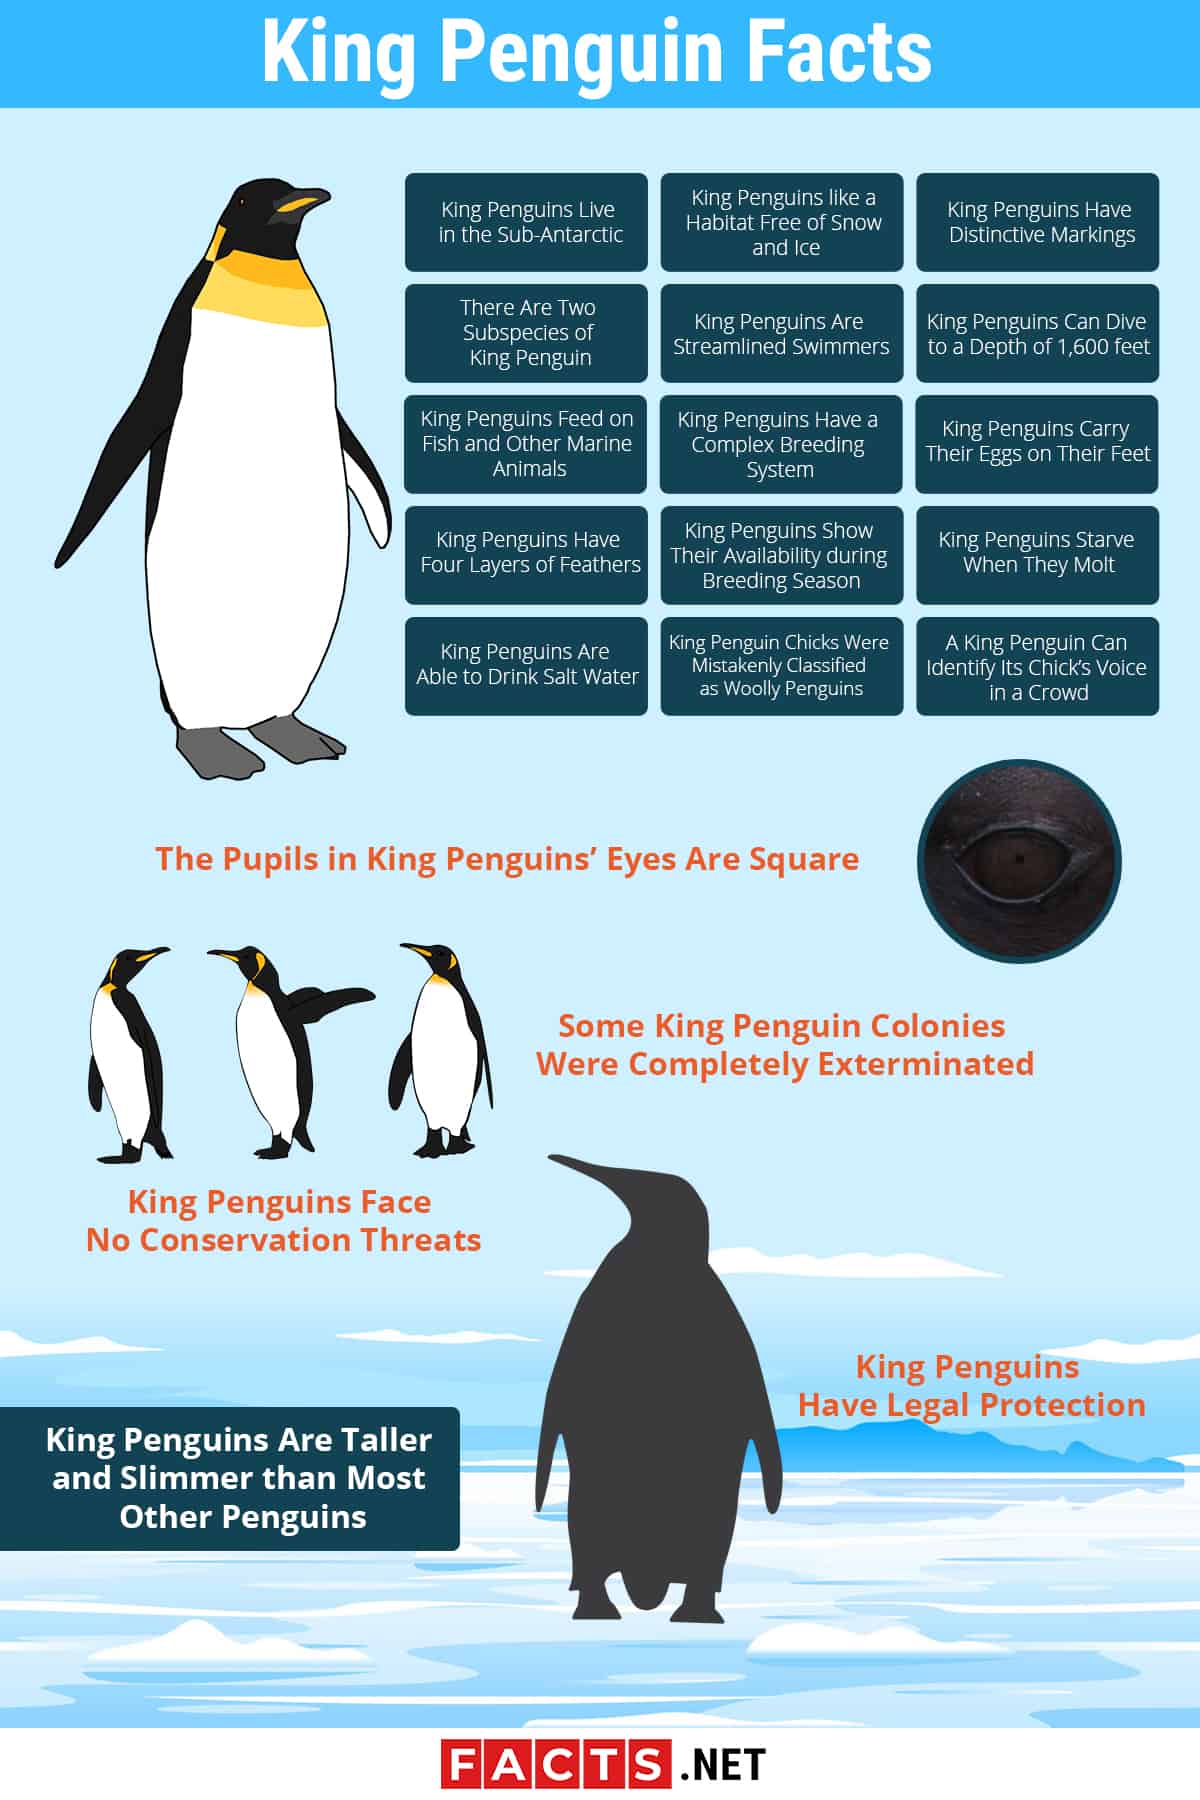 King penguin guide: species facts and where they live - Discover Wildlife